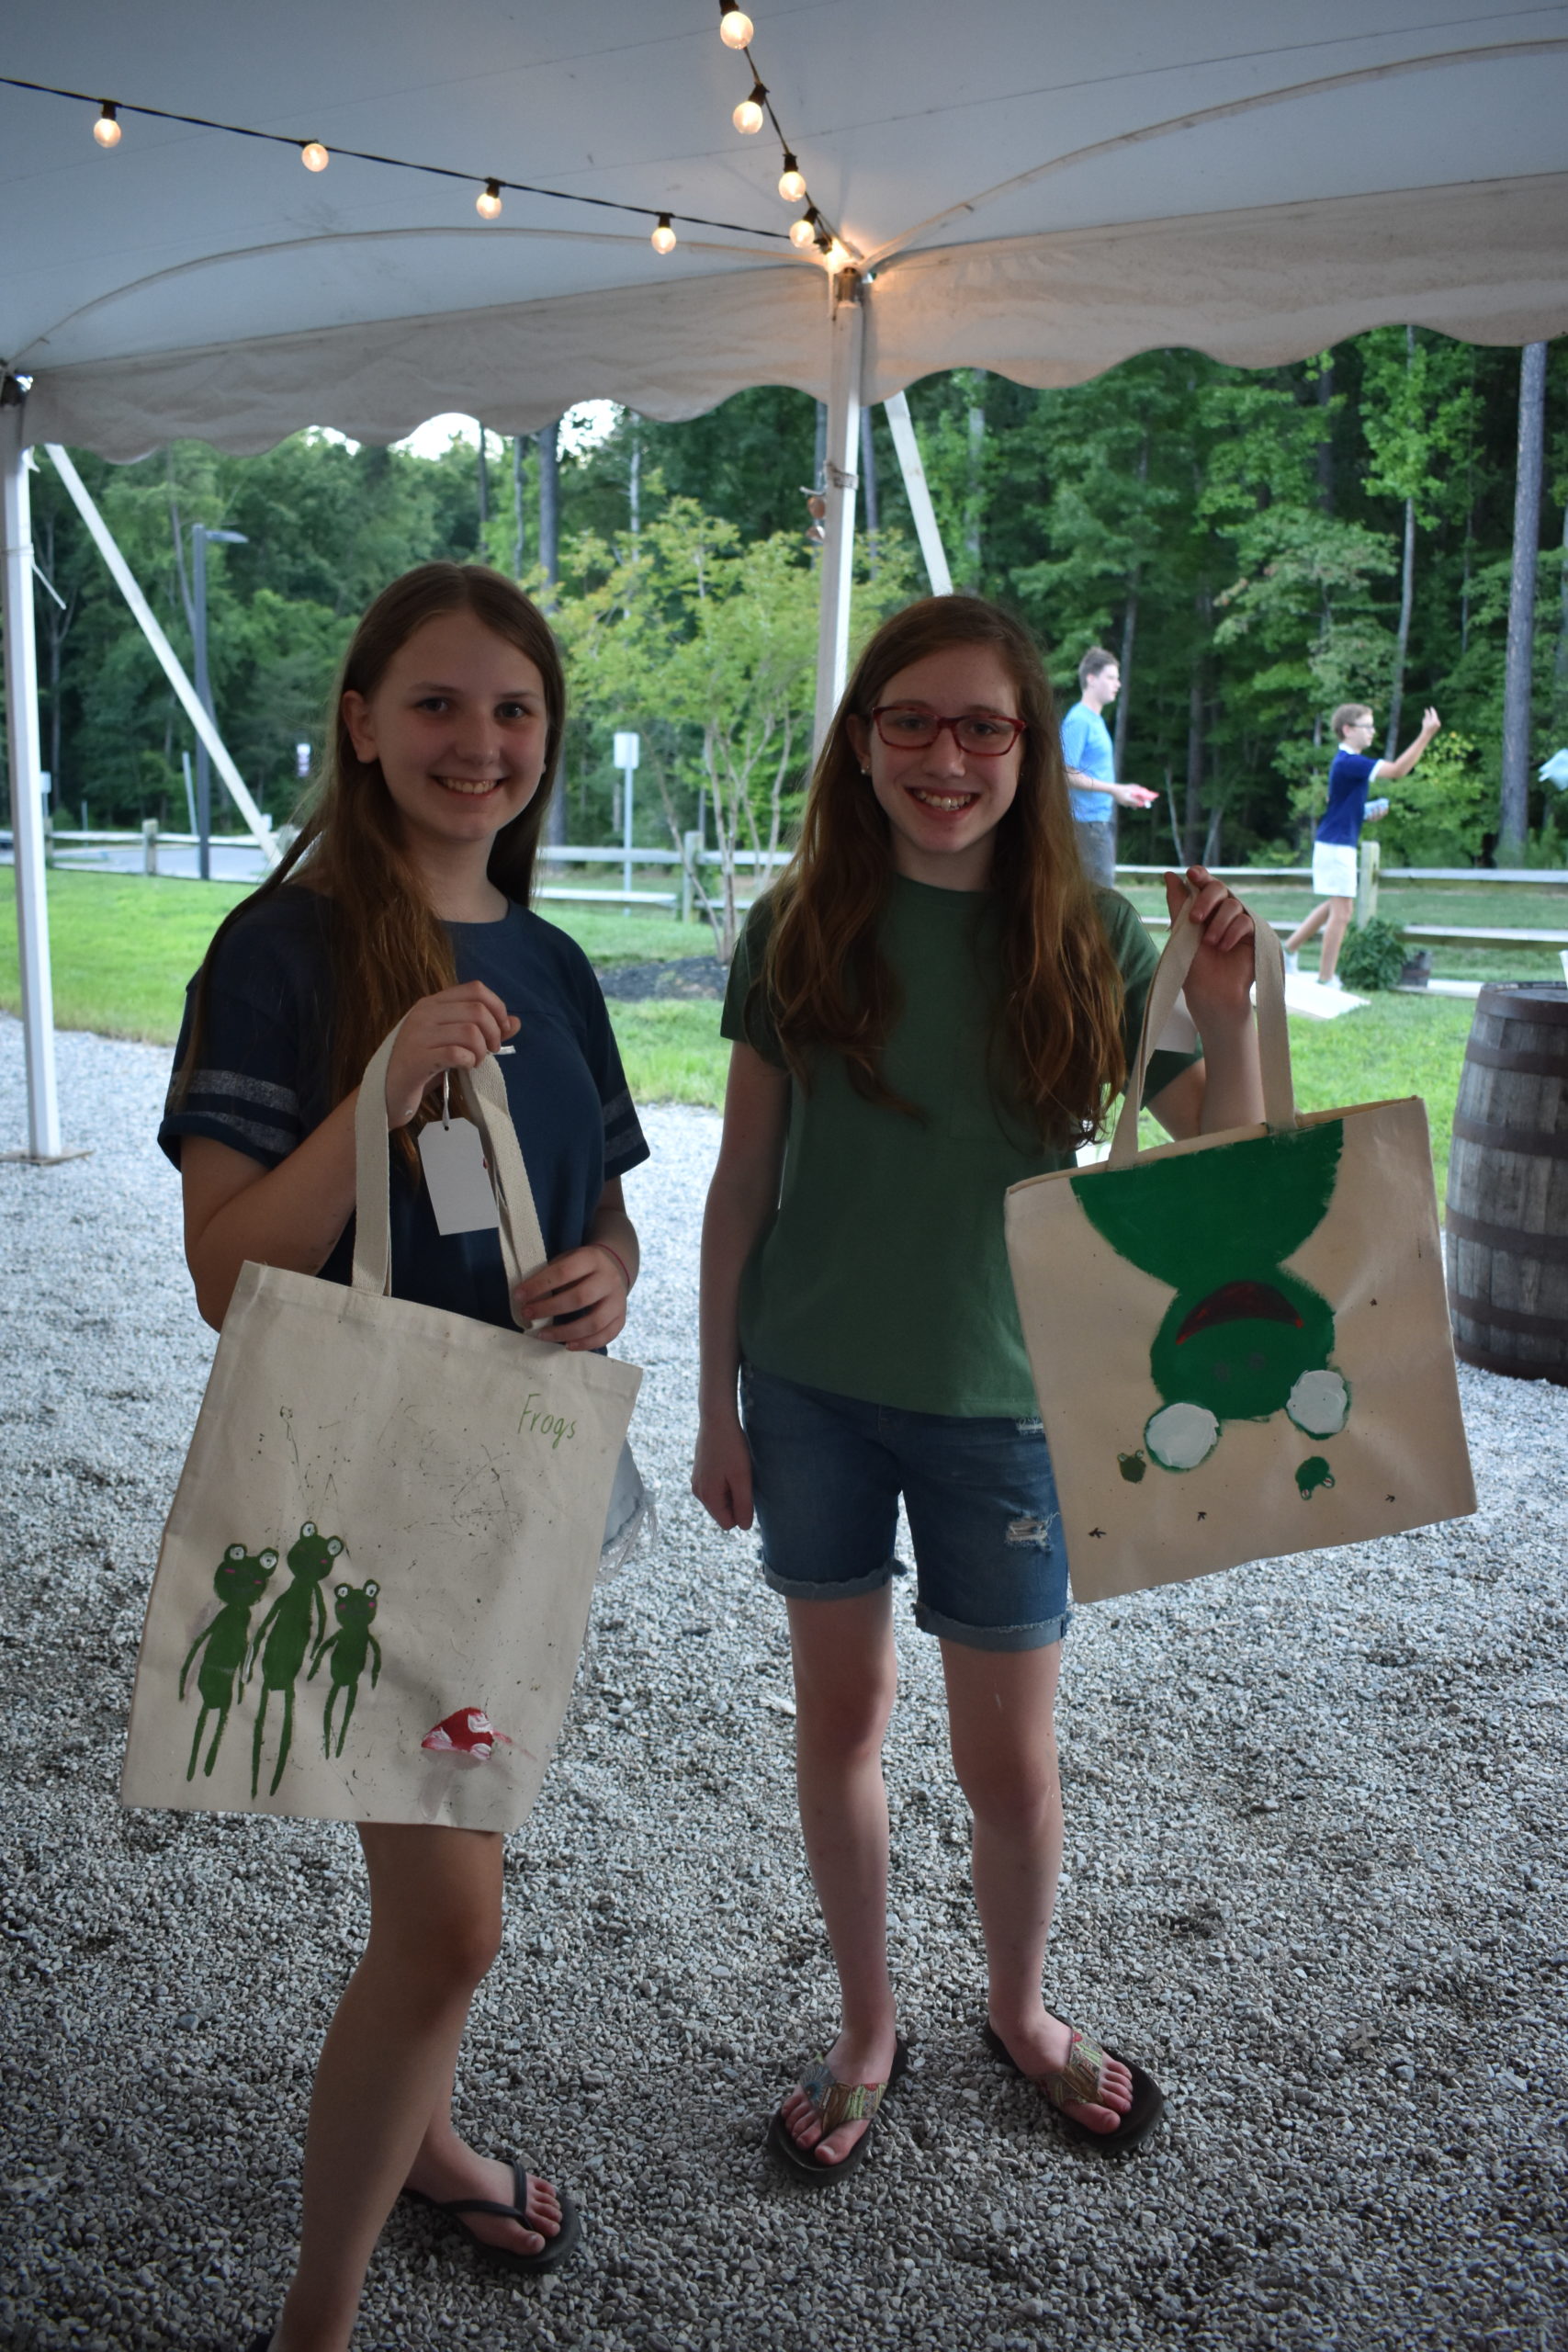 Two girls hold up tote bags they painted with frogs